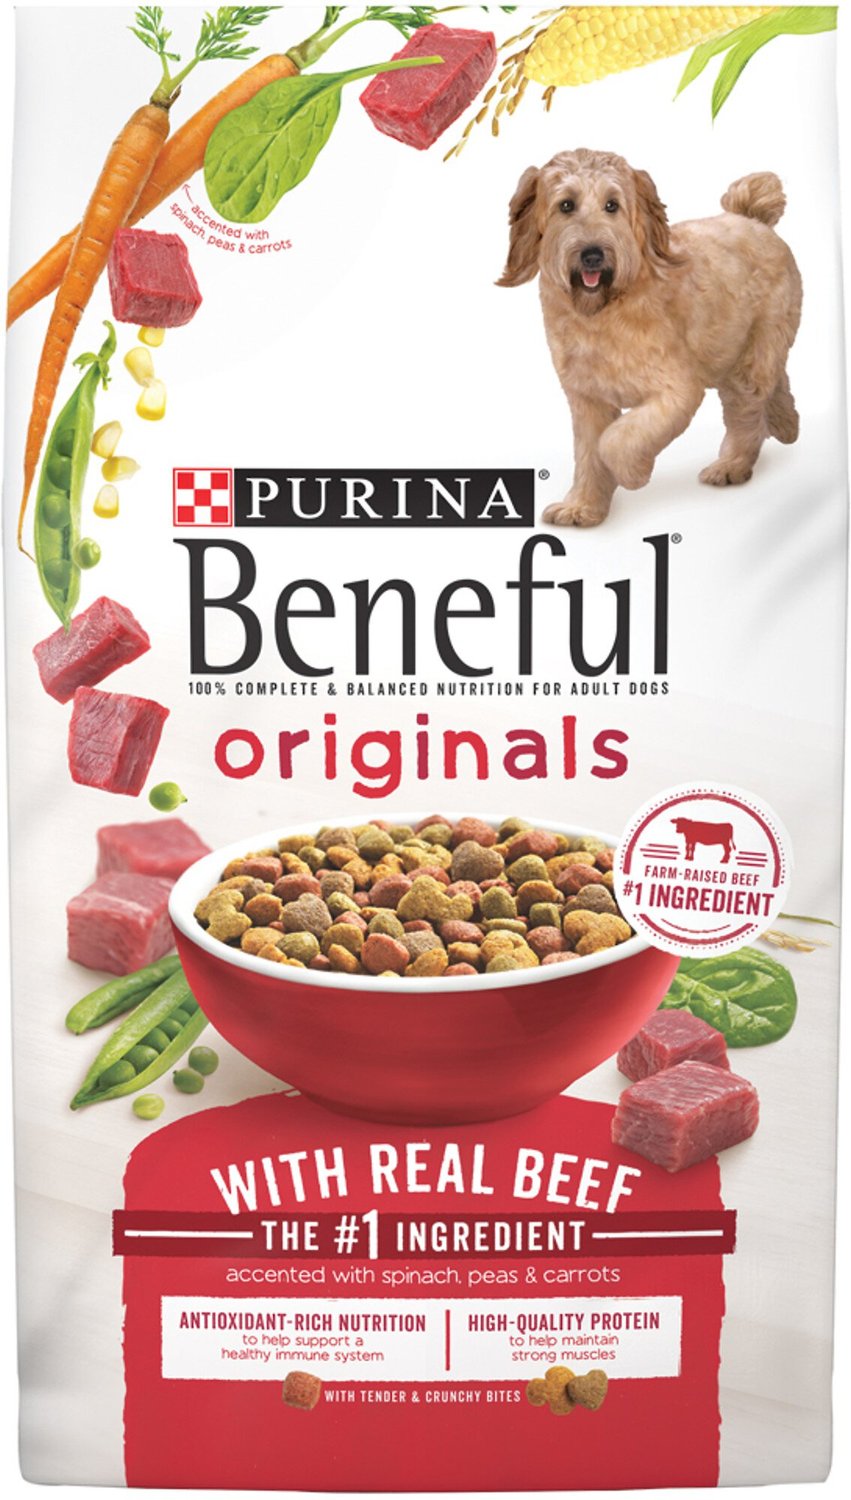 Purina Beneful Originals with Real Beef Dry Dog Food, 31.1